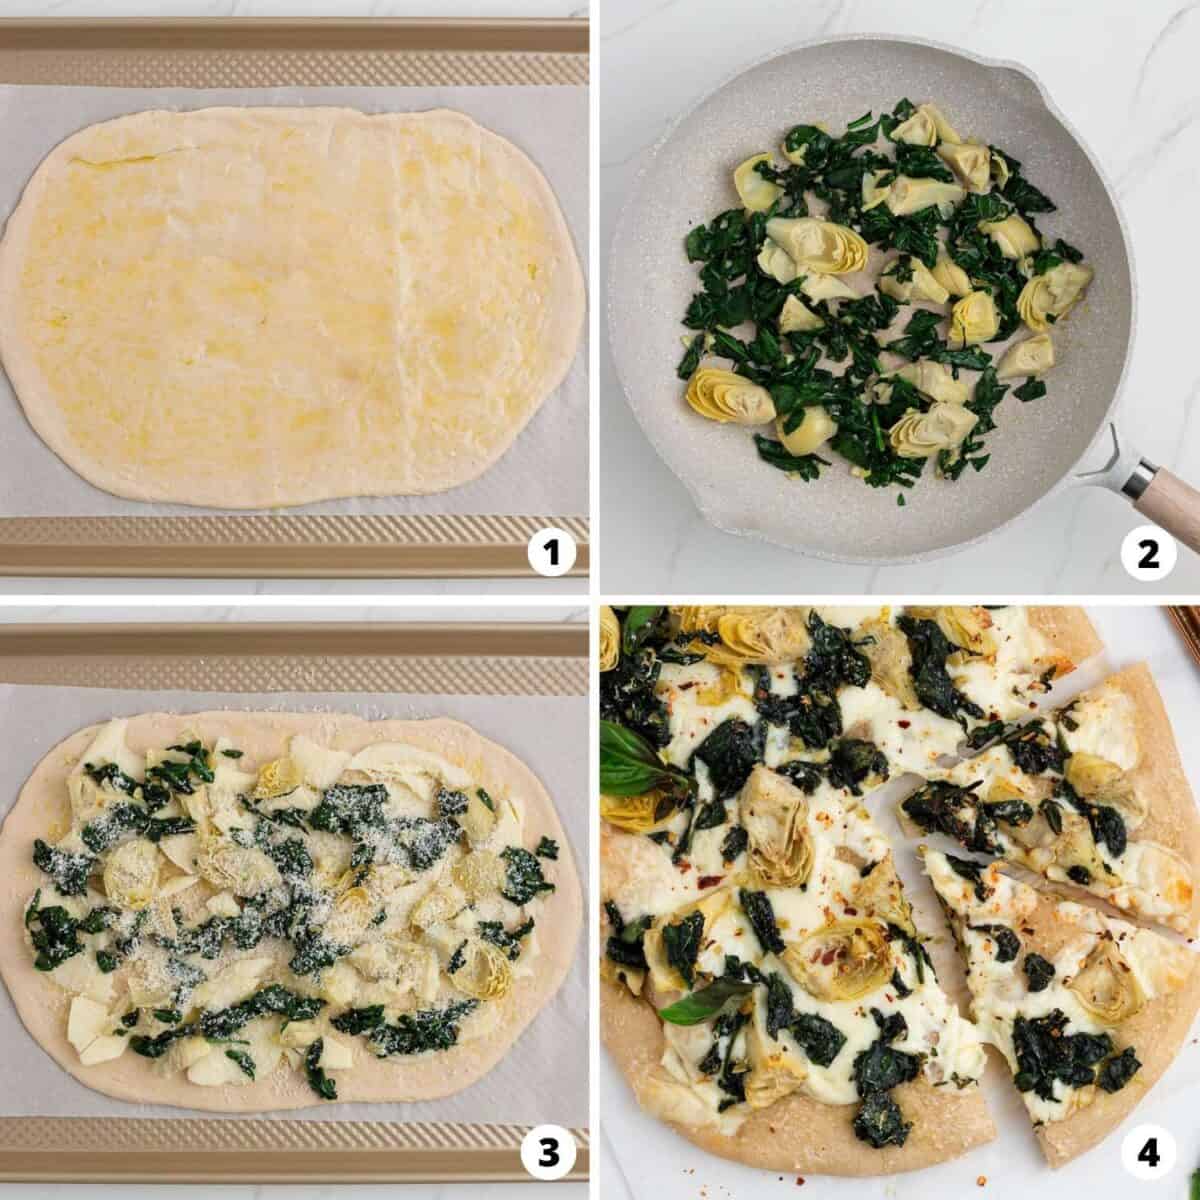 How to make spinach artichoke pizza collage.